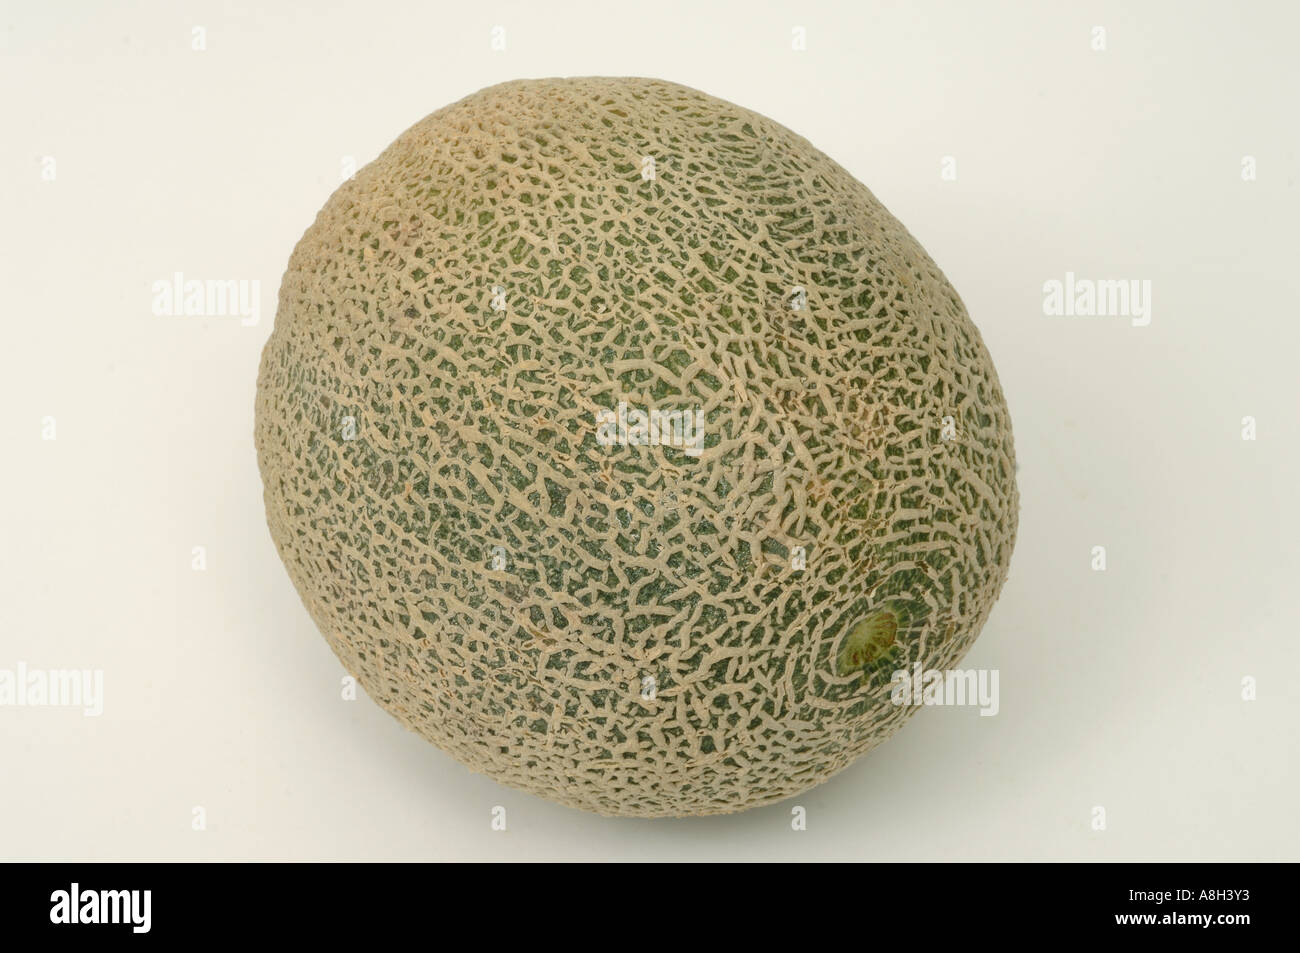 Musk melon supermarket bought and in normal shop condition Stock Photo